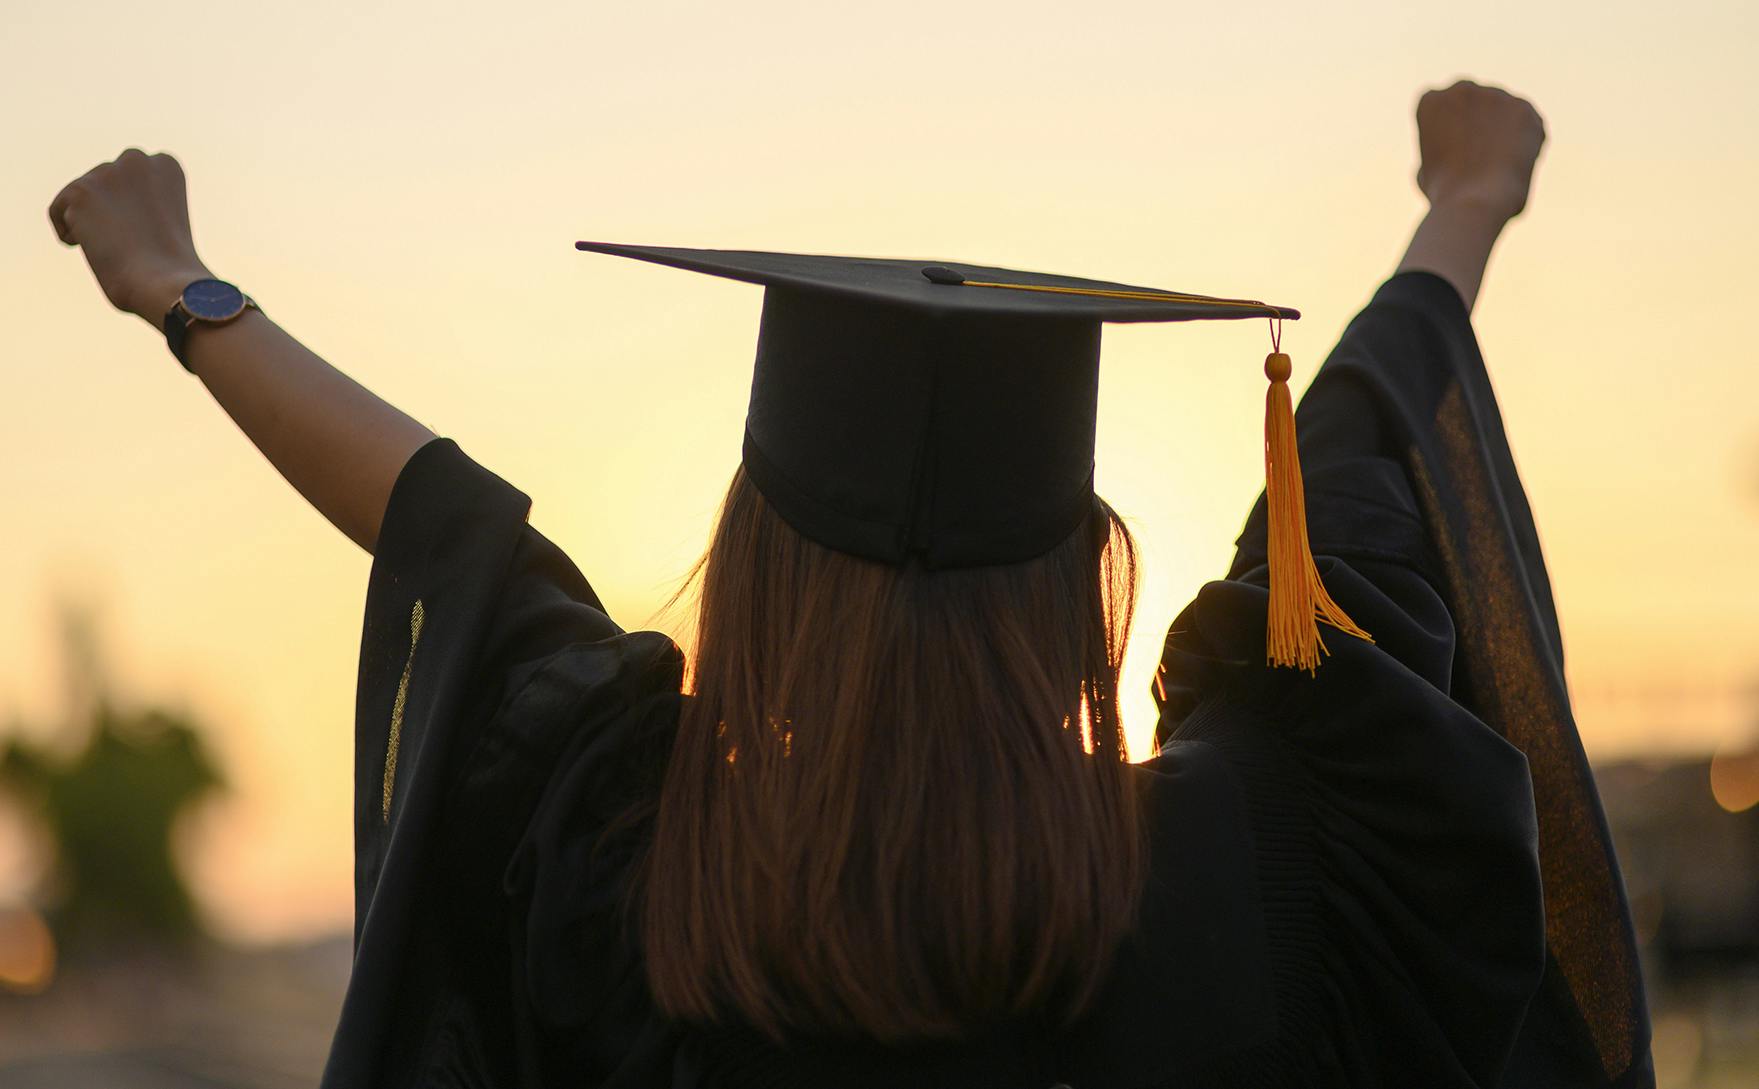 A girl facing away wearing her graduation hat and outfit with her arms raised in accomplishment